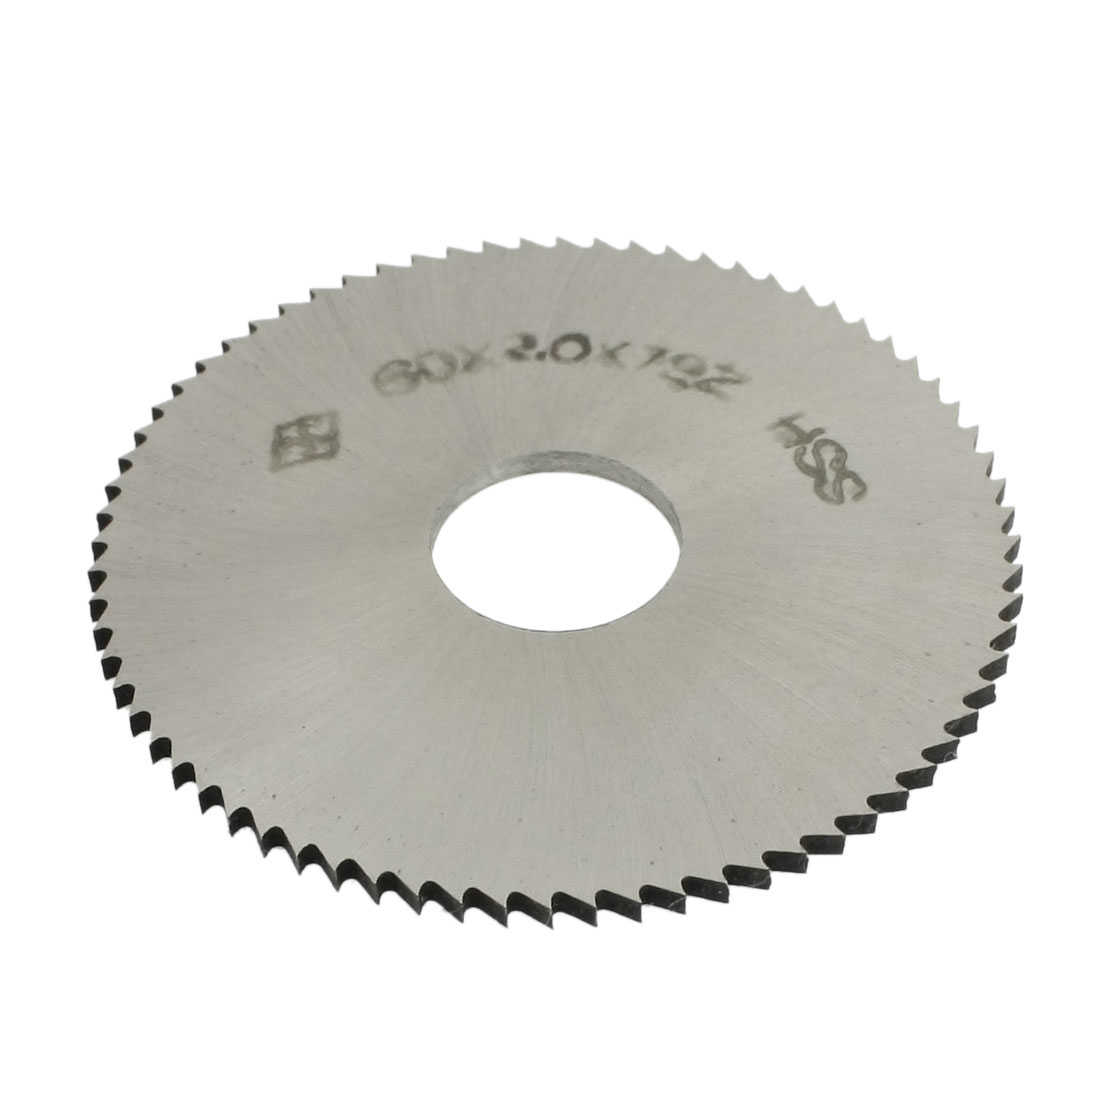 Unique Bargains Silver Tone HSS 60mm x 2mm x 16mm 72 Toothed Slitting Saw Blade